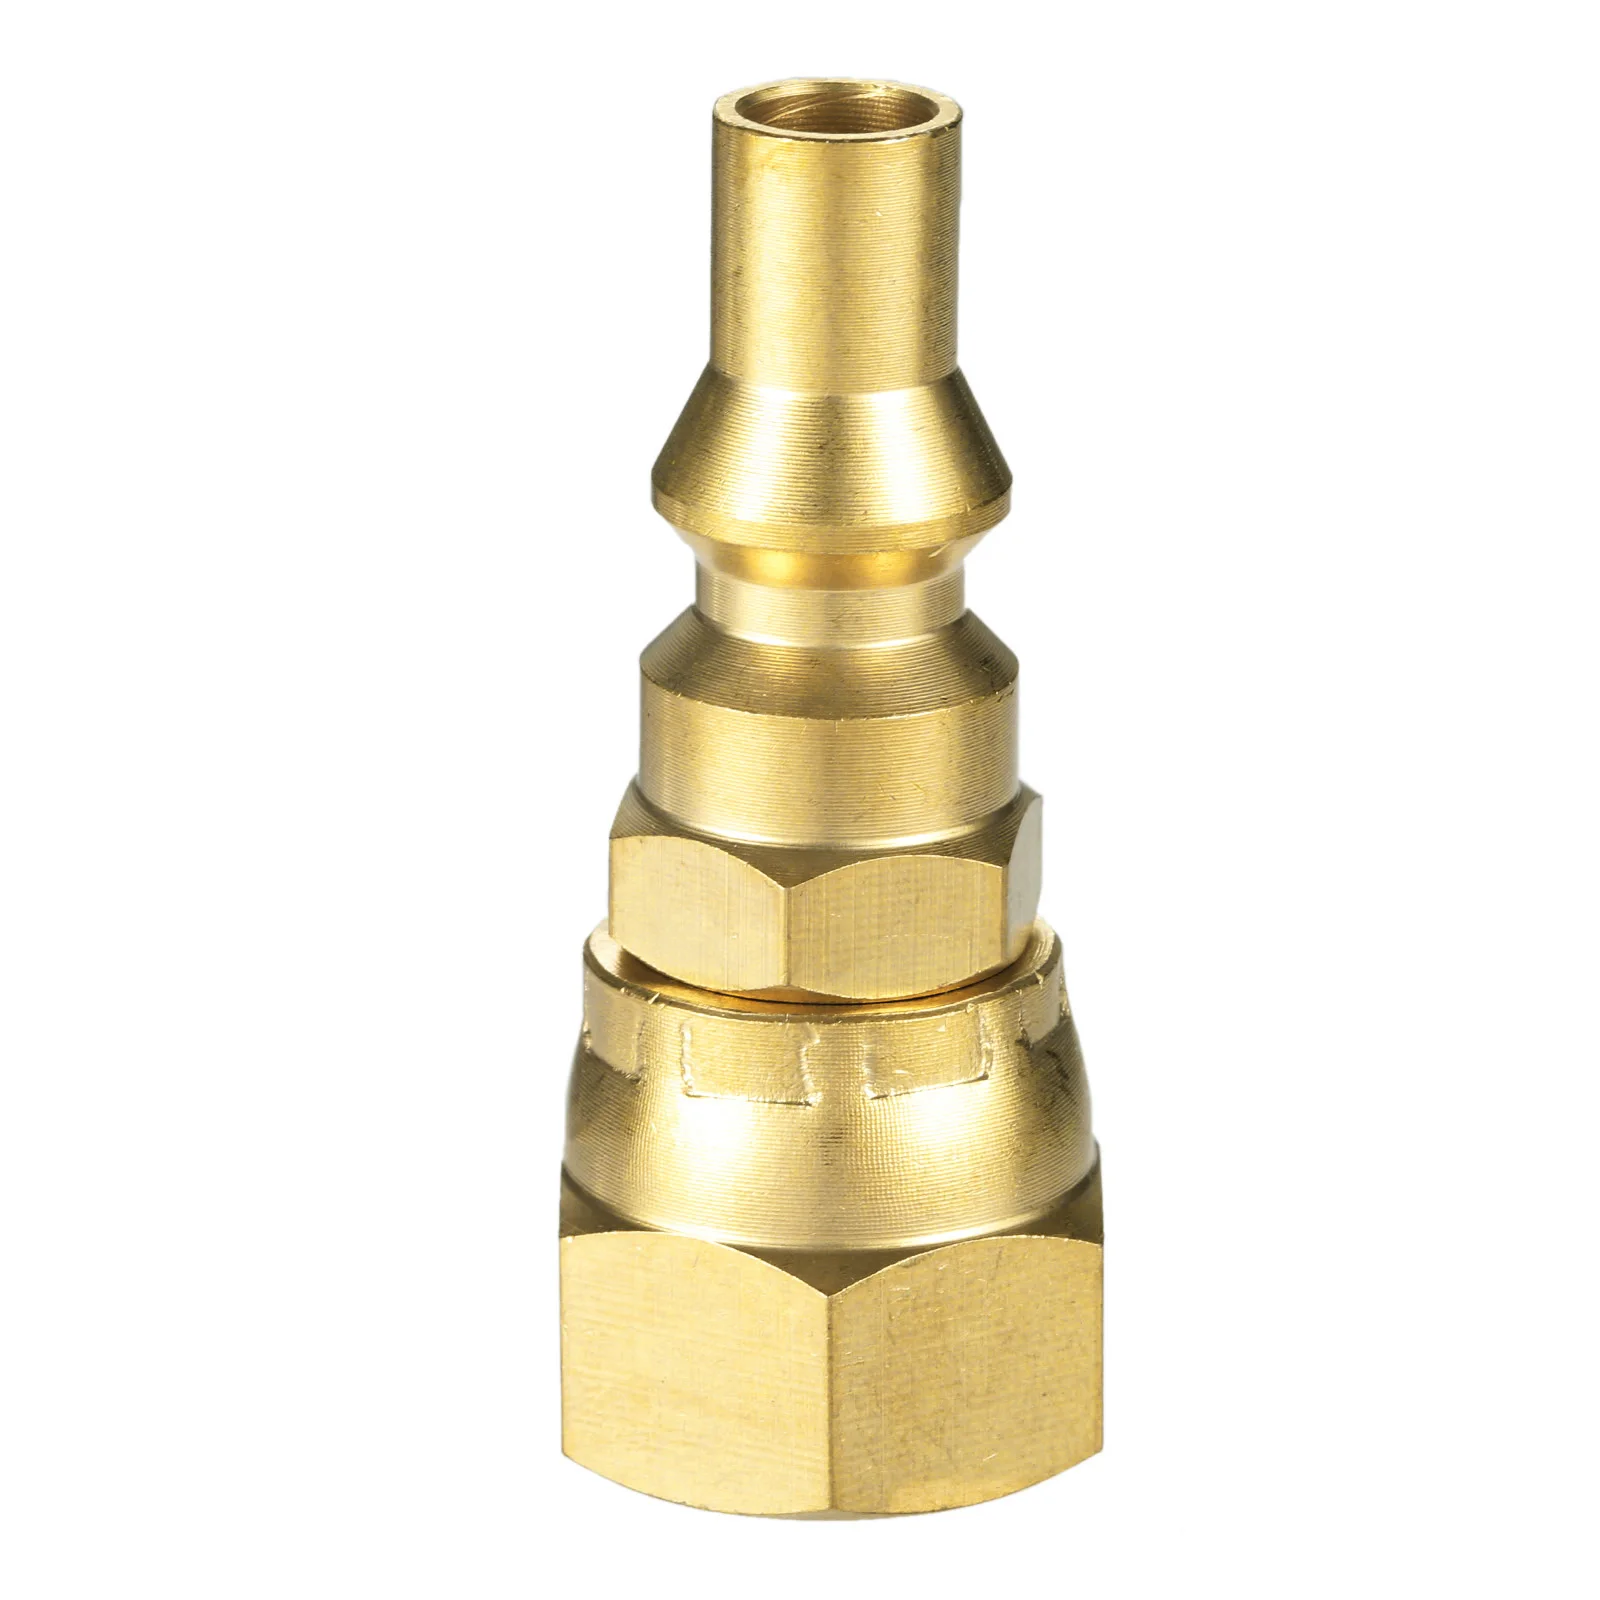 Portable Propane Brass Fitting Male Plug Flare Quick Connector for RV Oven BBQ 